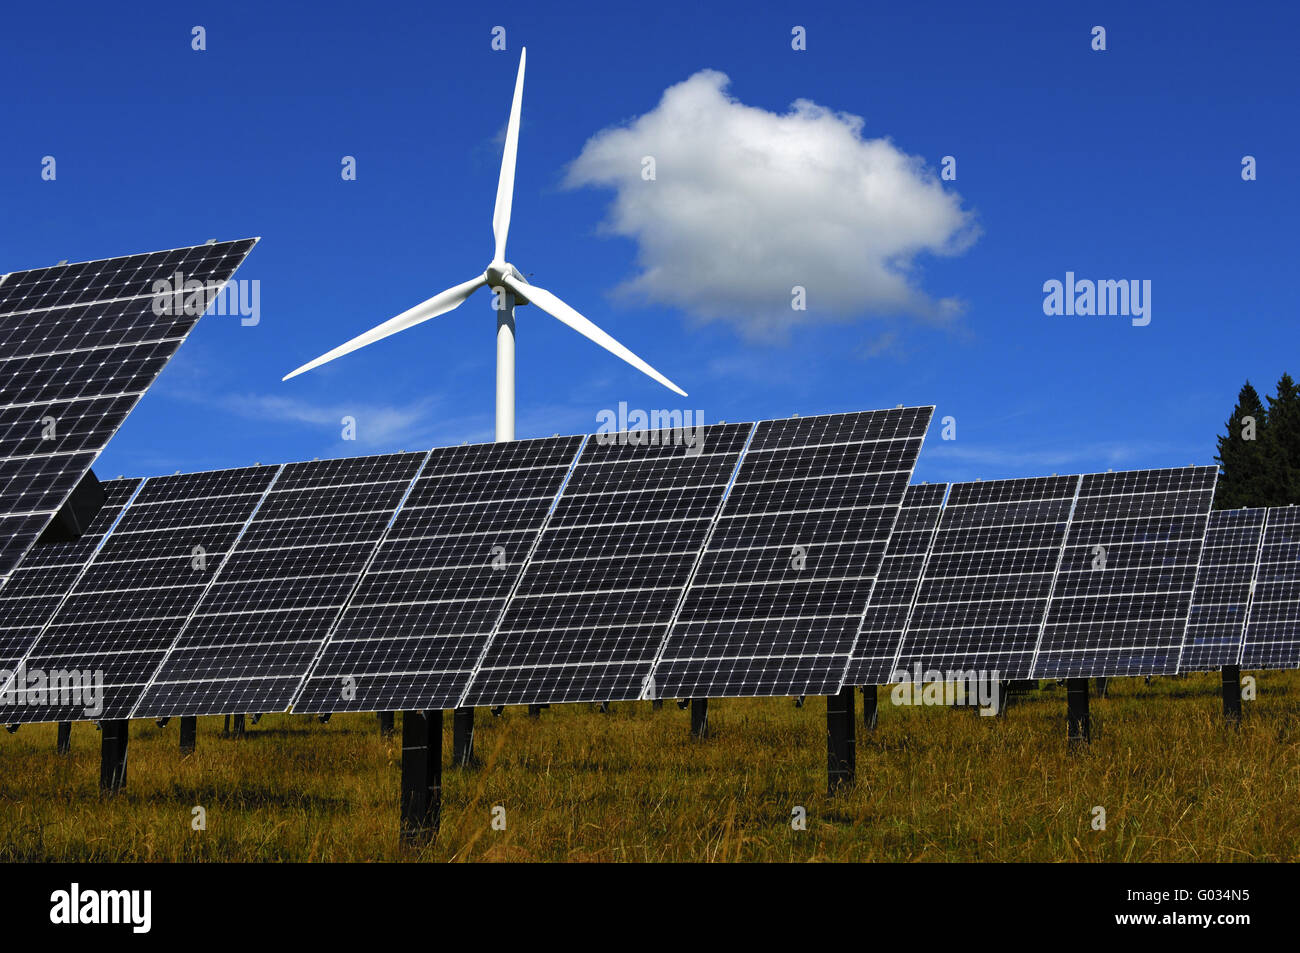 Green energy, solar panels and a wind turbine Stock Photo